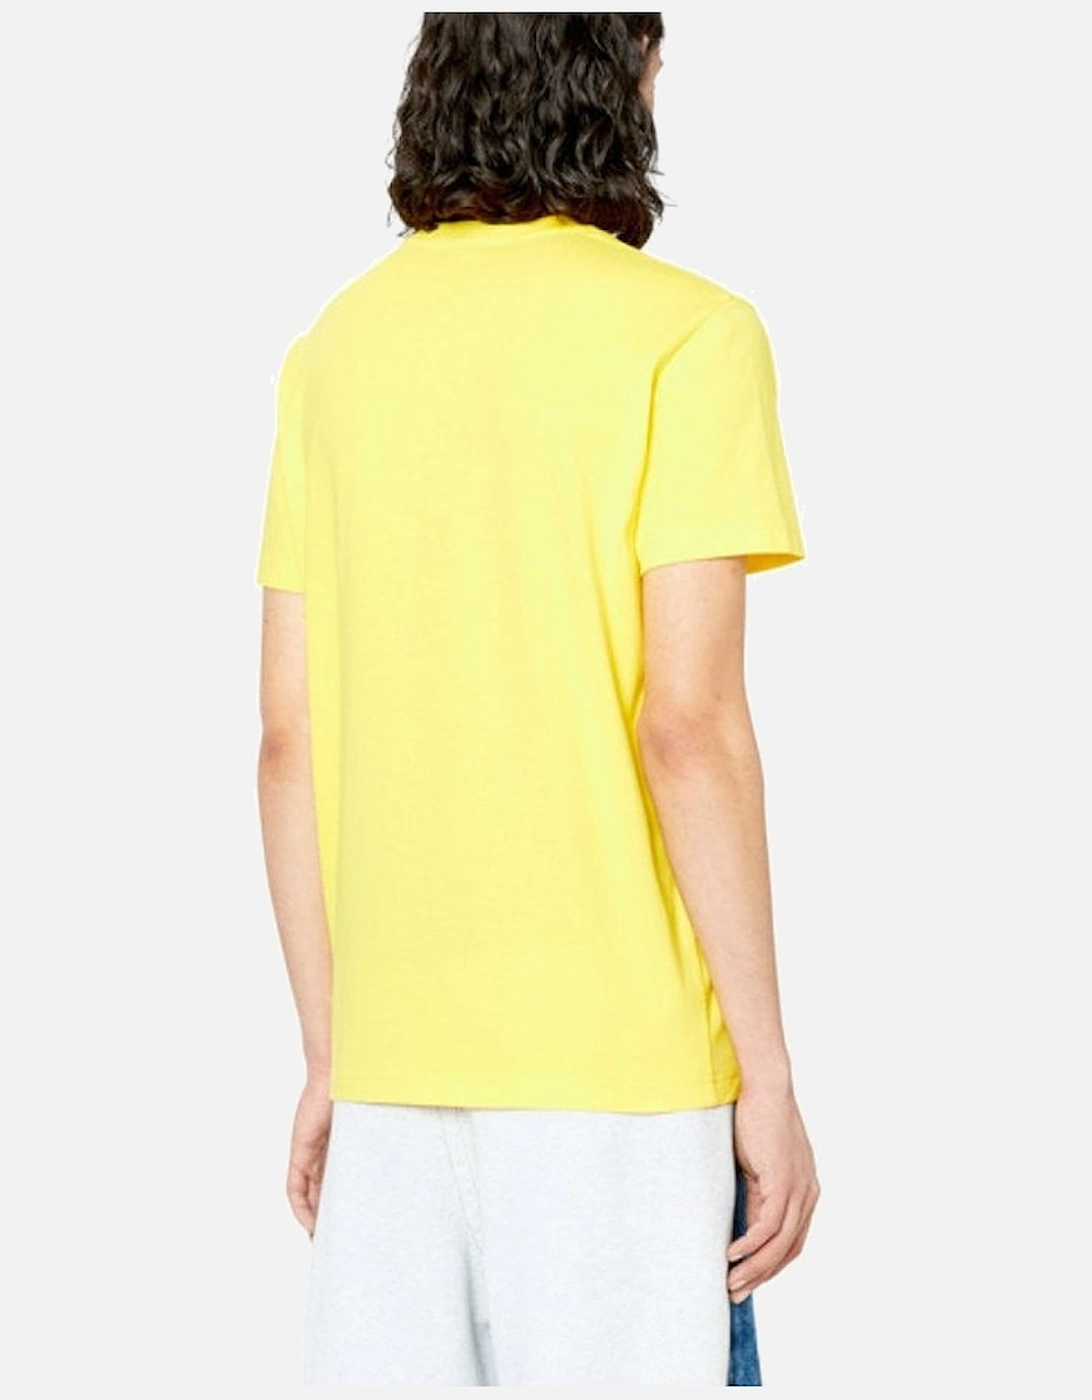 Mens T-diegor T Shirt D Top Quality Yellow